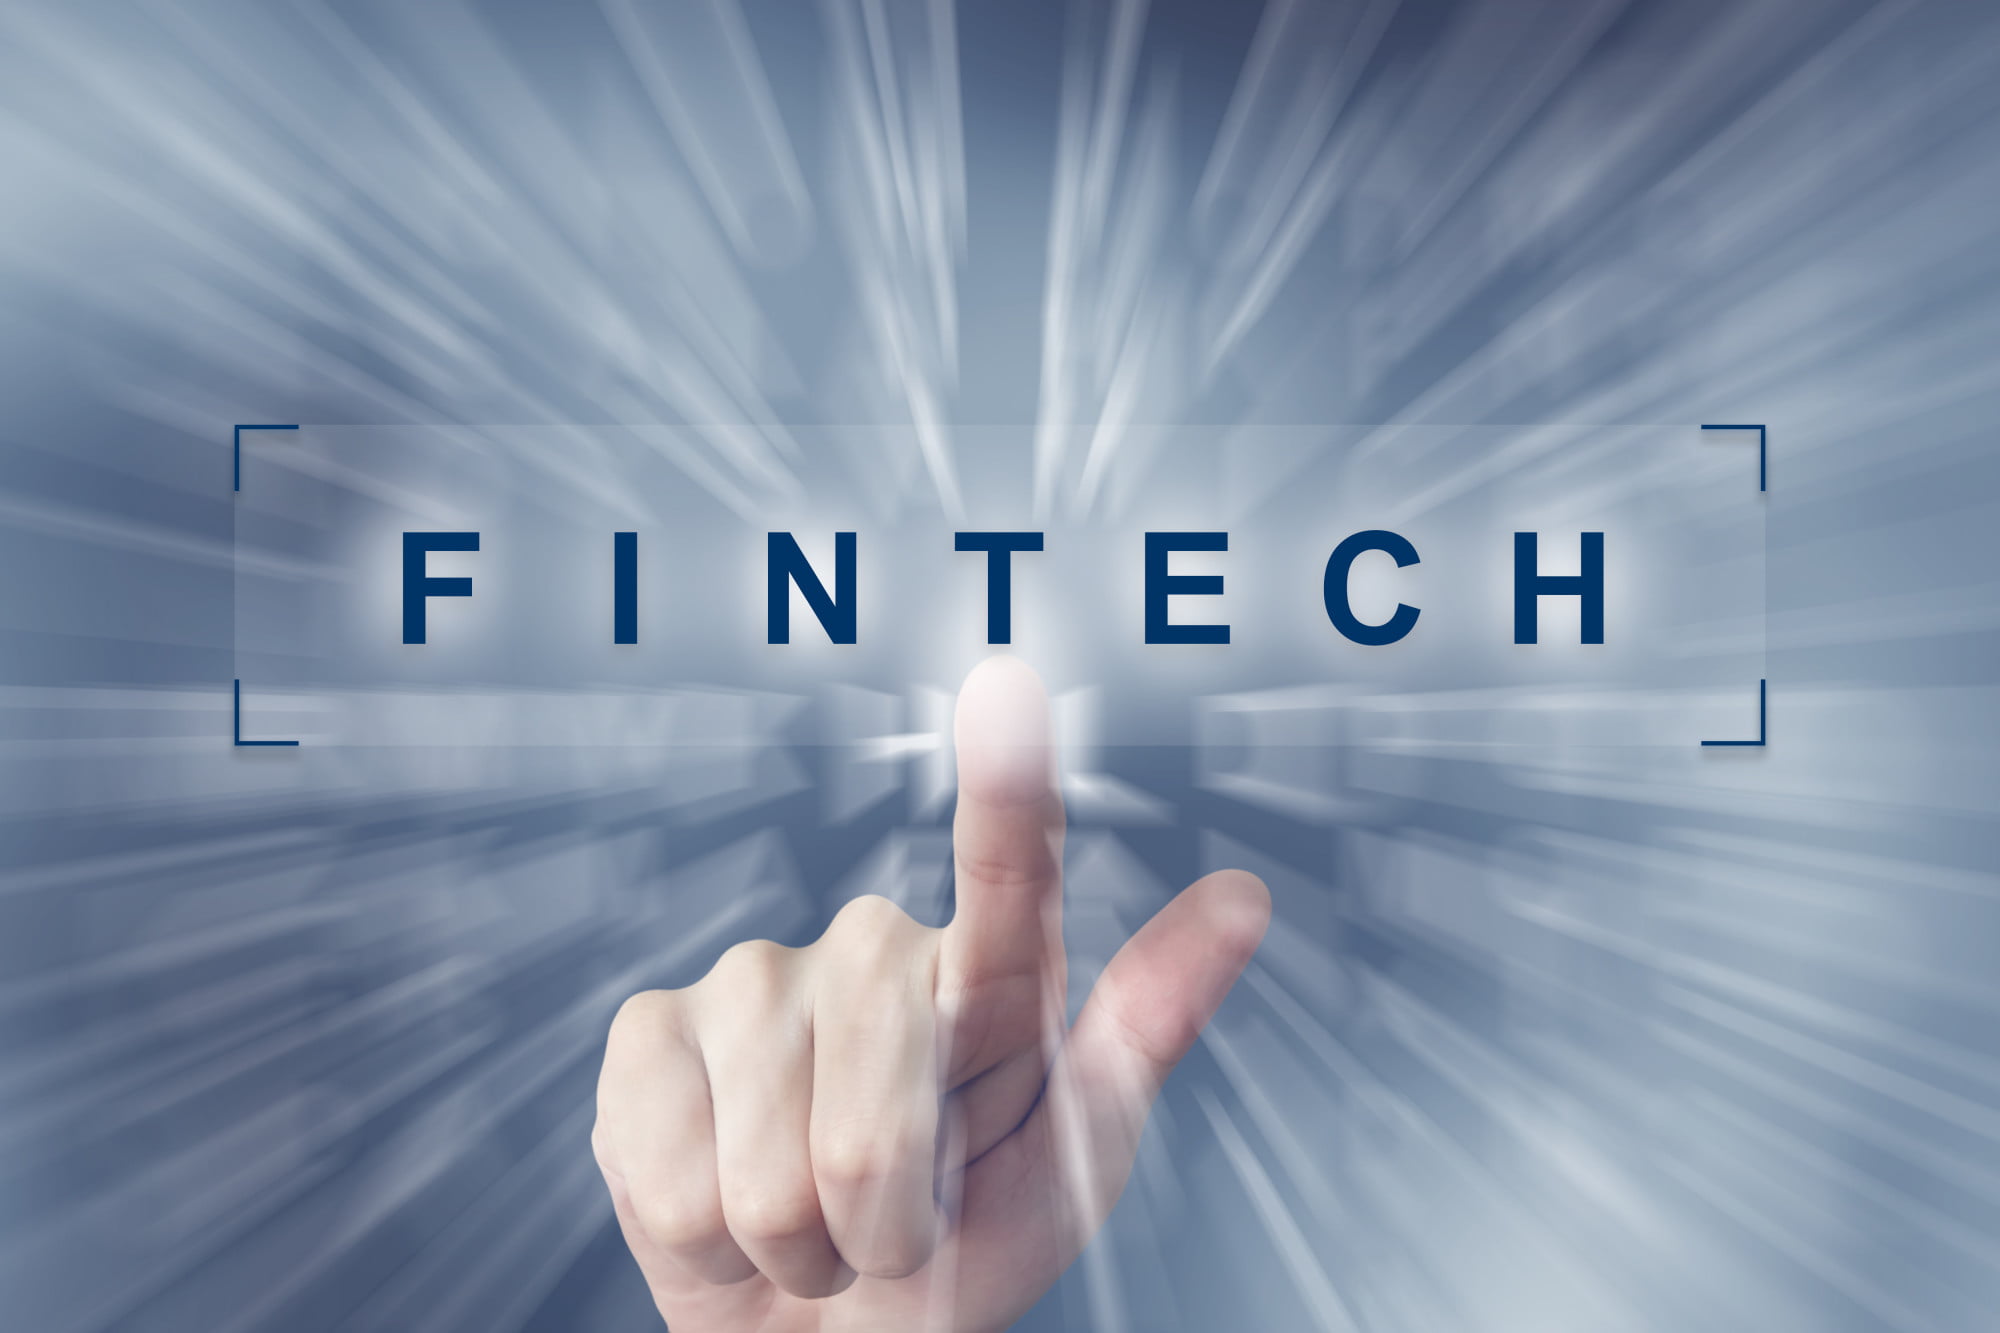 What is fintech? Feel free you read about it here in this detailed breakdown. You can learn about fintech platforms and more.